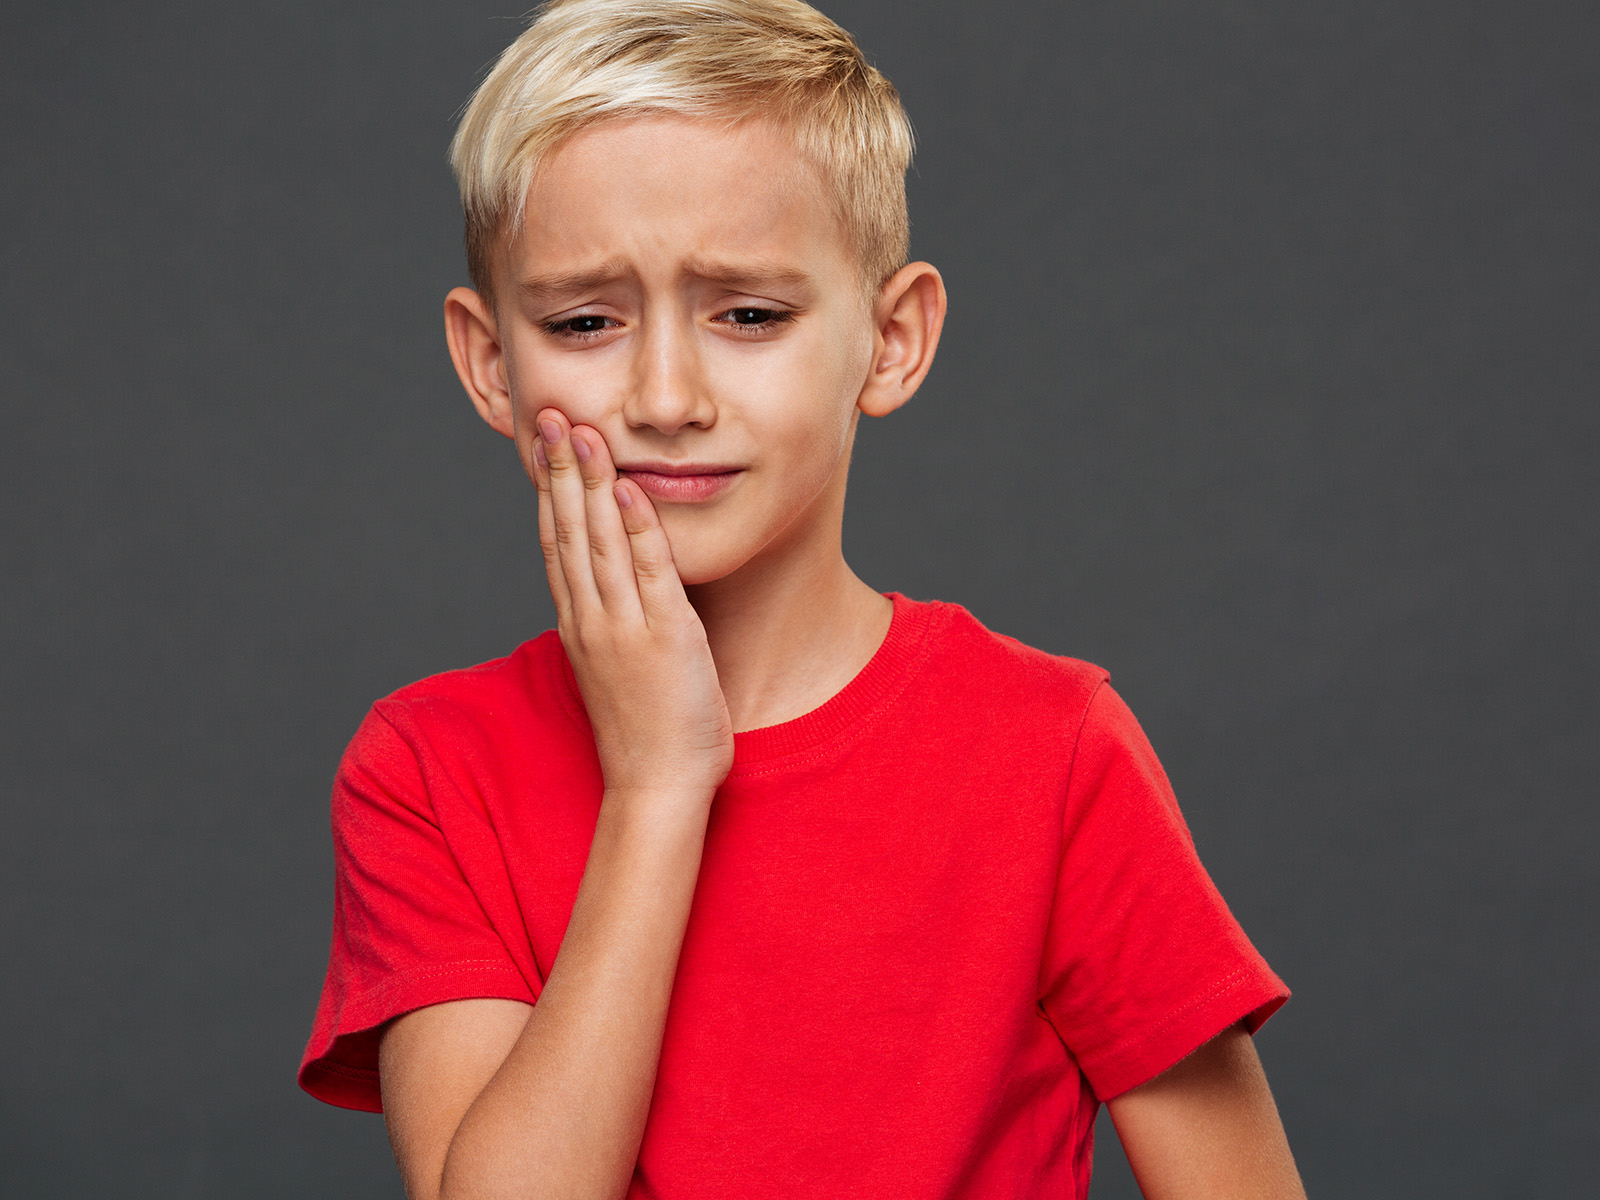 Periodontal Disease In Children: Causes, Prevention, And Treatment